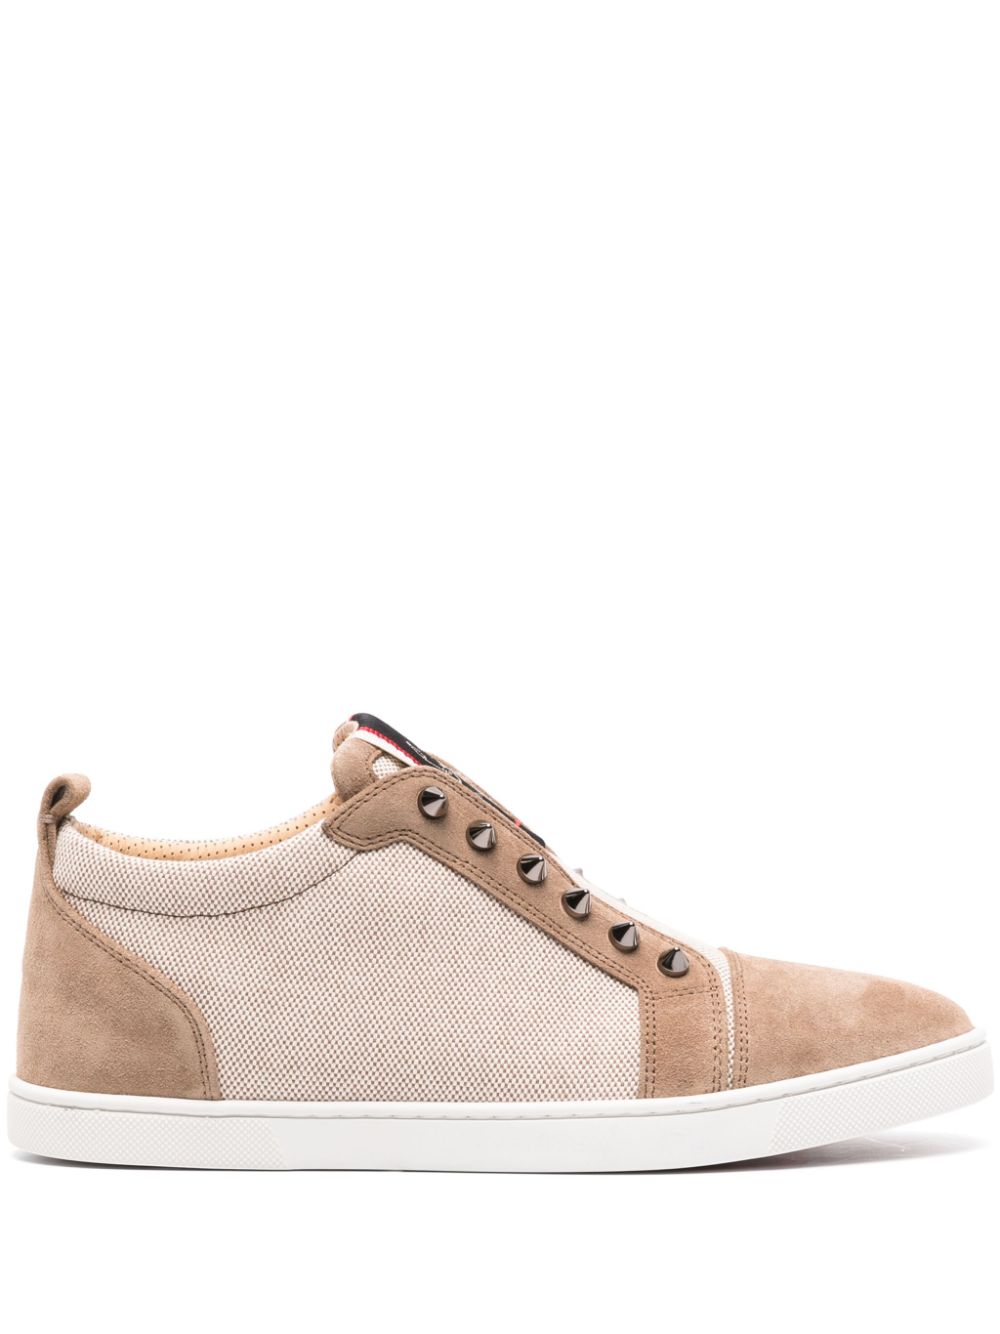 CHRISTIAN LOUBOUTIN Brown Low-Top Sneakers for Men, with Spike Stud Detailing and Logo Patch